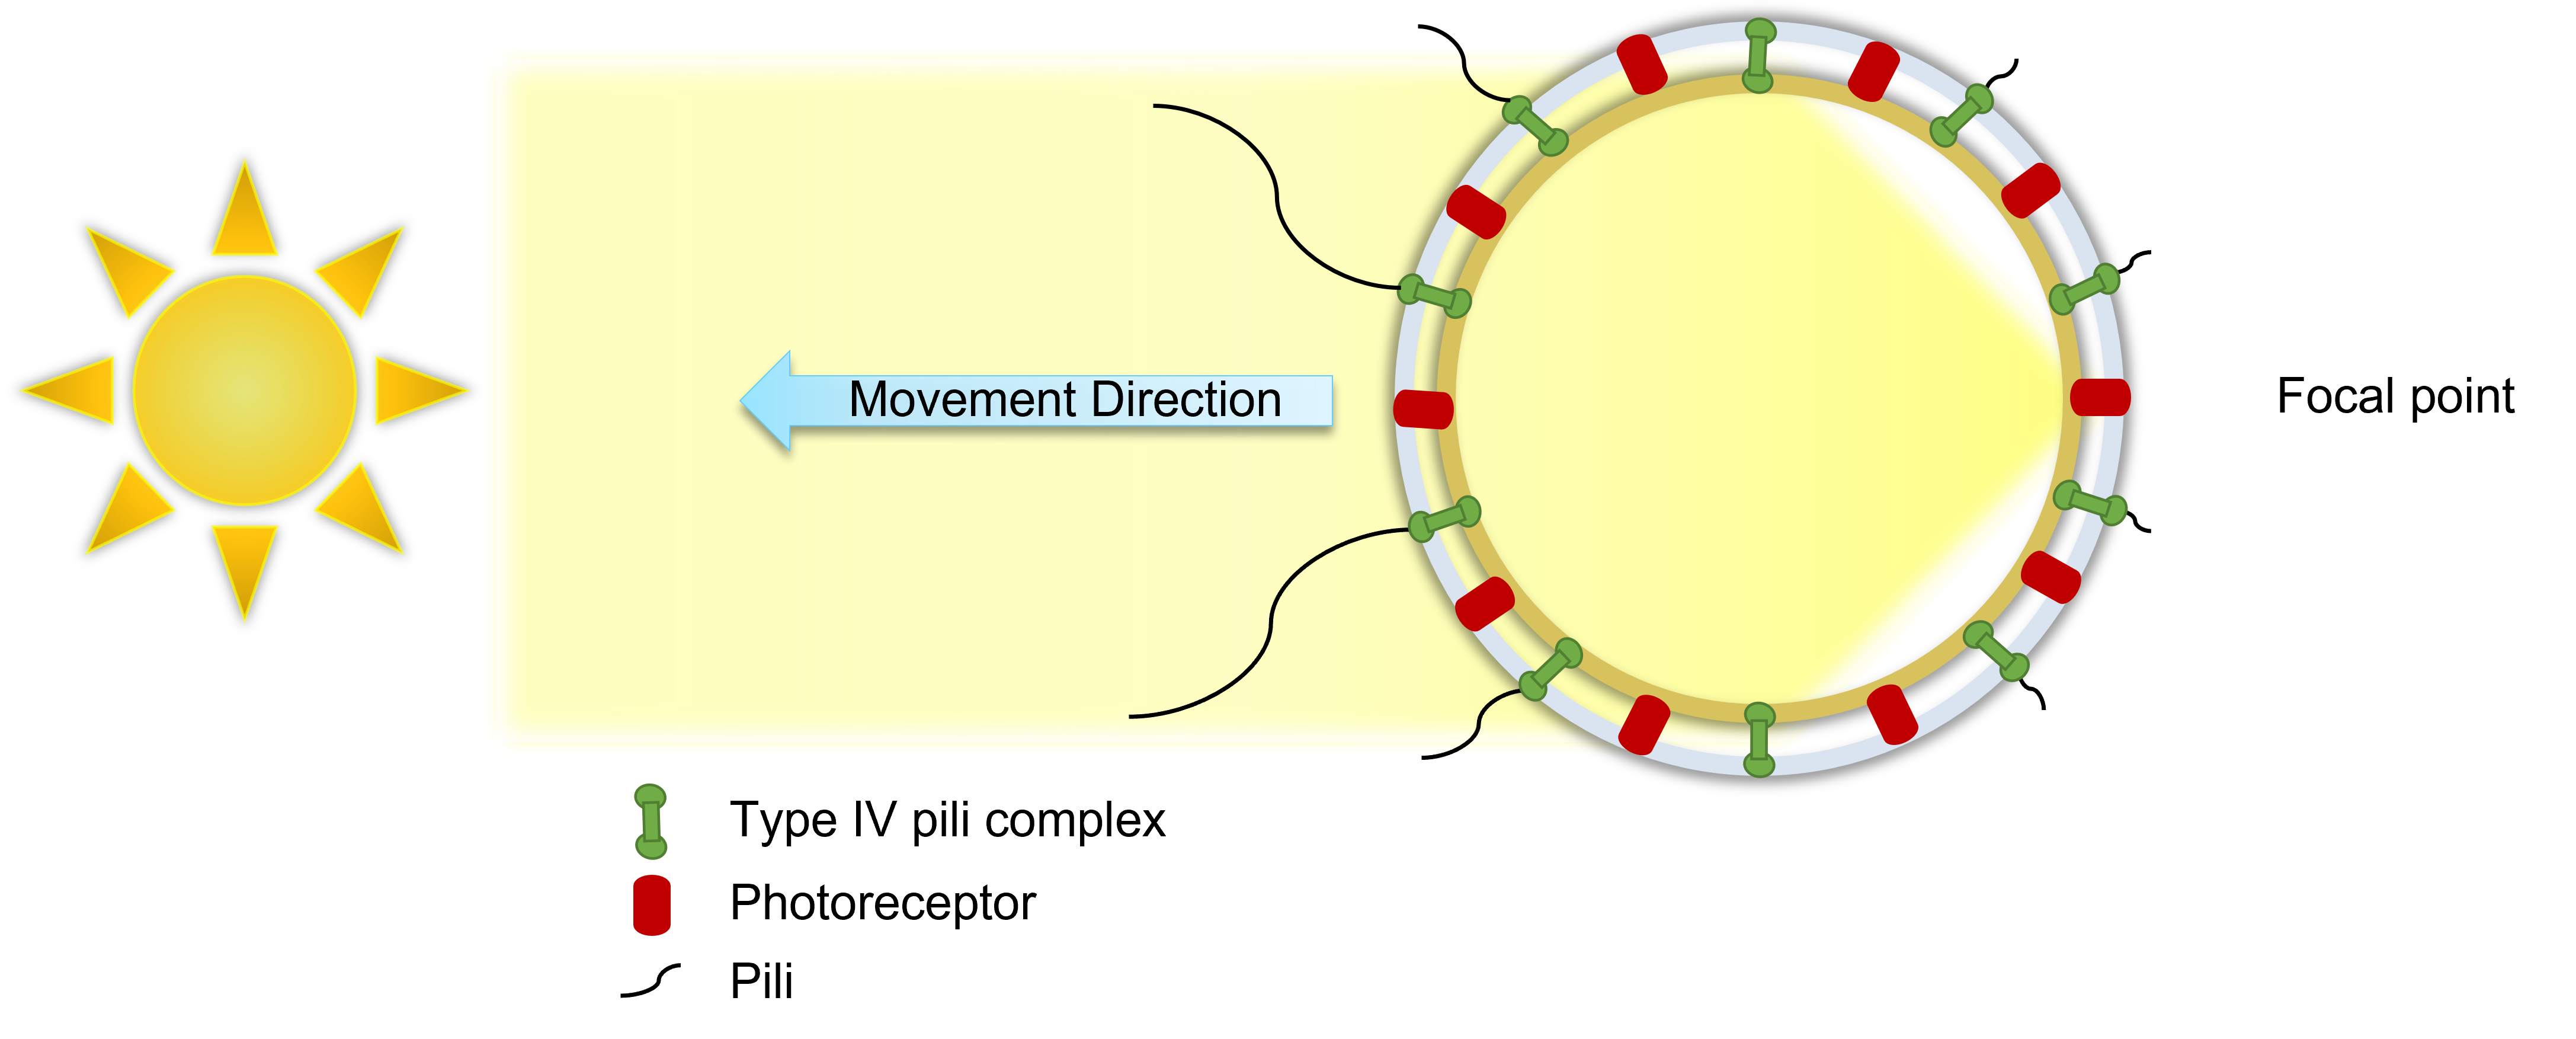 Figure 9. The cyanobacterium Synechocystis sp. cell acts as a lens and focuses the light at the opposite side of a light source (focal point). The photoreceptor proteins deactivate the type IV pili complexes near the focal point and activate the ones at the opposite side of the focal point, which leads the cell towards the light source in positive phototaxis. Modified/Adapted with permission from [143,157,160]. Copyright 2022 Elsevier.